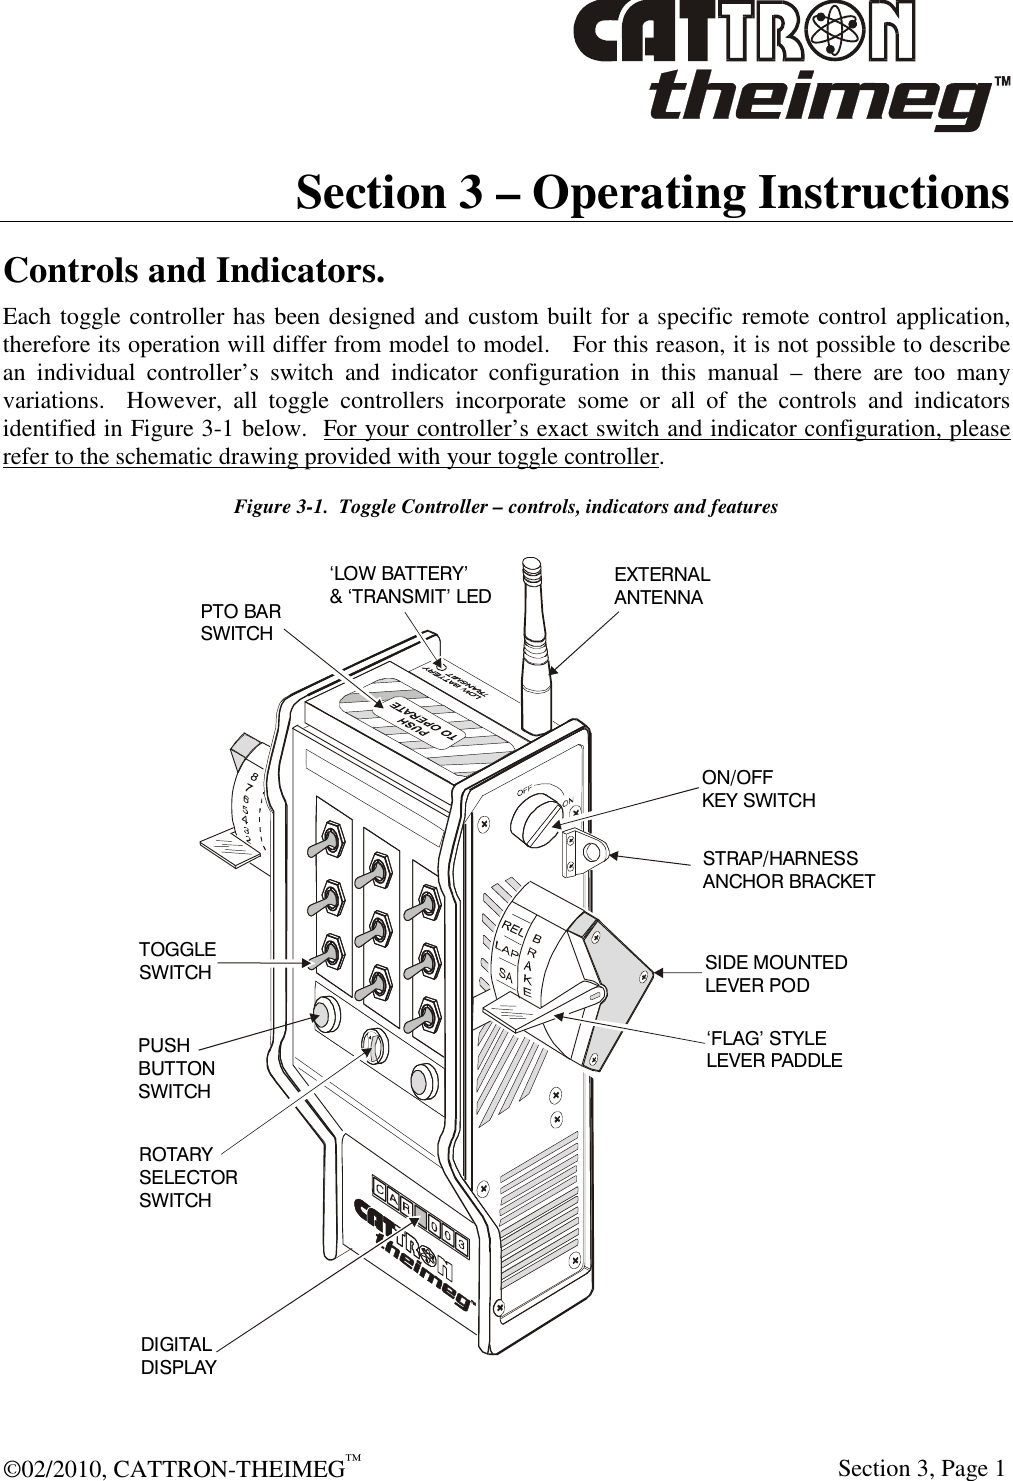  ©02/2010, CATTRON-THEIMEG™     Section 3, Page 1 Section 3 – Operating Instructions  Controls and Indicators. Each toggle controller has been designed and custom built for a specific remote control application, therefore its operation will differ from model to model.   For this reason, it is not possible to describe an  individual  controller’s  switch  and  indicator  configuration  in  this  manual  –  there  are  too  many variations.    However,  all  toggle  controllers  incorporate  some  or  all  of  the  controls  and  indicators identified in Figure 3-1 below.  For your controller’s exact switch and indicator configuration, please refer to the schematic drawing provided with your toggle controller. Figure 3-1.  Toggle Controller – controls, indicators and features PTO BAR SWITCHON/OFFKEY SWITCHEXTERNAL ANTENNA‘LOW BATTERY’&amp; ‘TRANSMIT’ LEDSTRAP/HARNESSANCHOR BRACKETSIDE MOUNTEDLEVER POD‘FLAG’ STYLELEVER PADDLETOGGLESWITCHPUSHBUTTONSWITCHROTARYSELECTORSWITCHDIGITALDISPLAY 